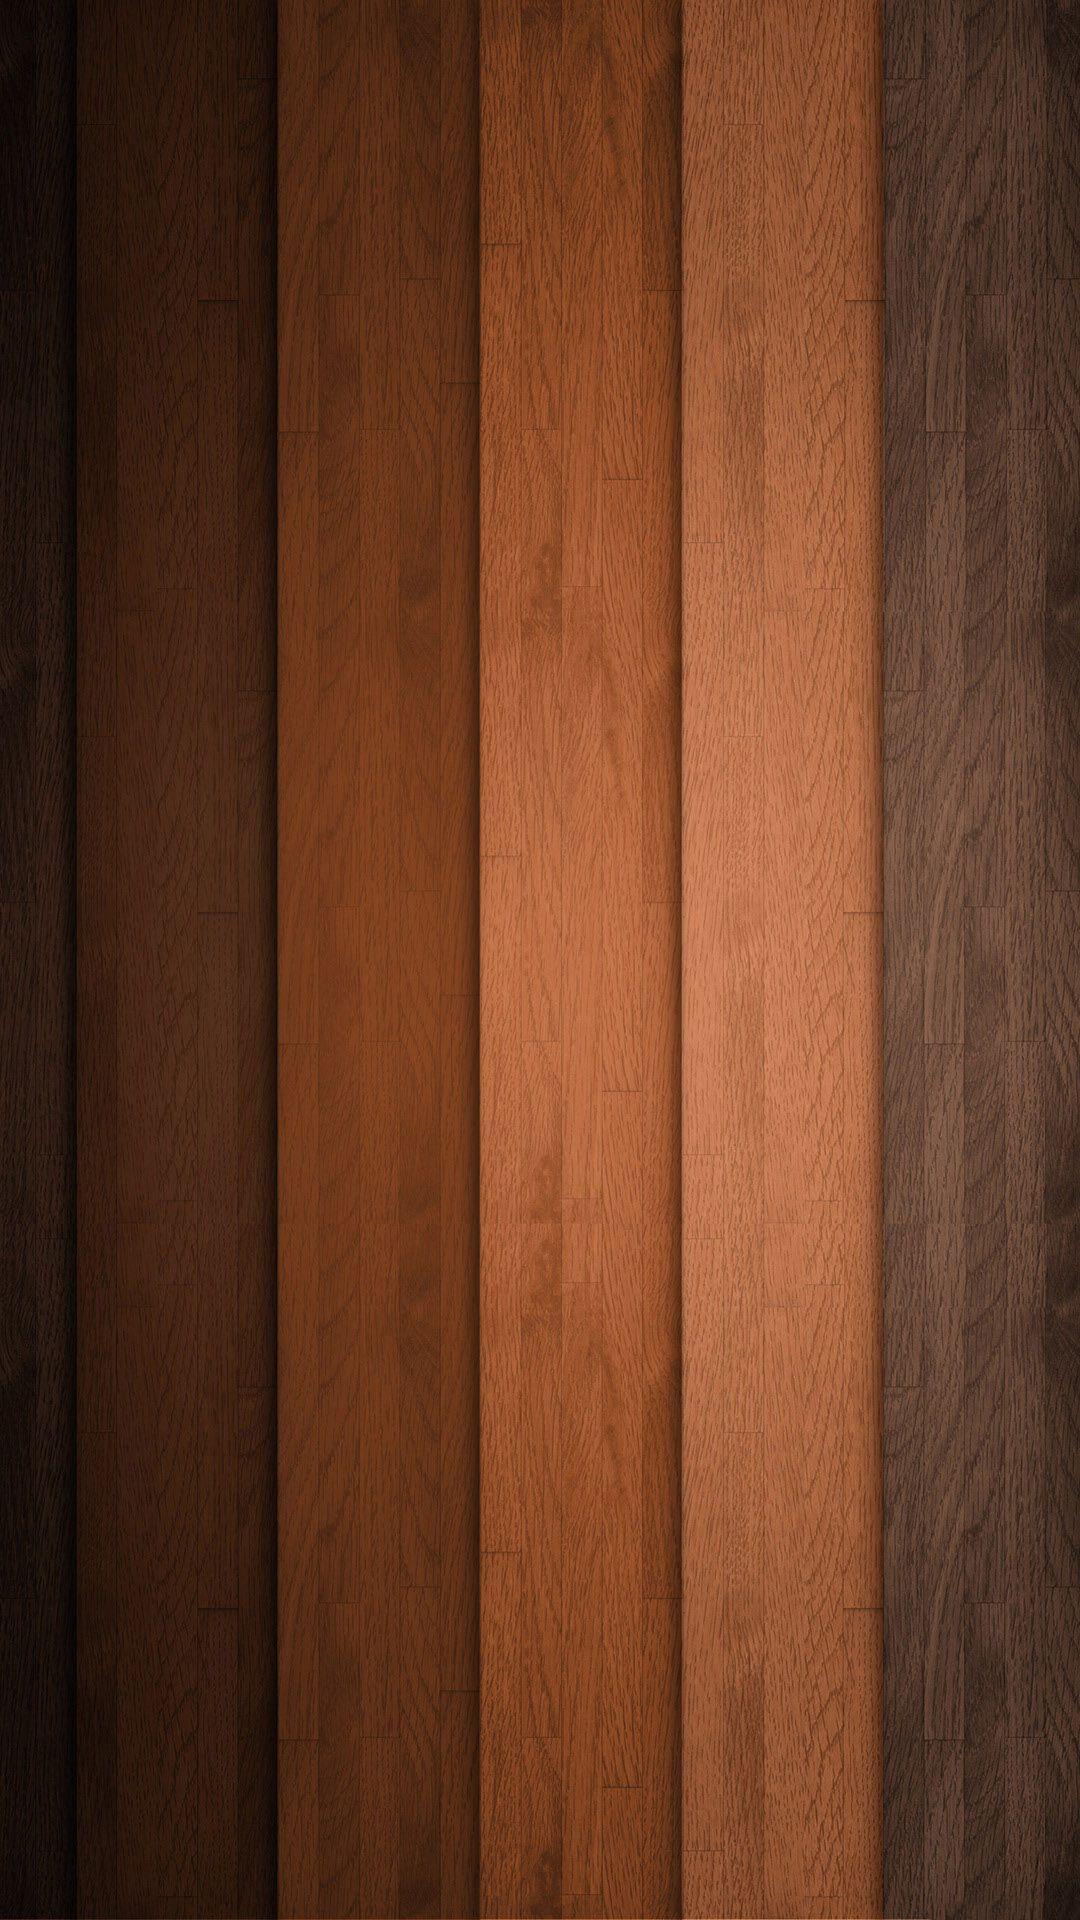 Wood Planks Texture Background Shades Of Brown Android Wallpaper